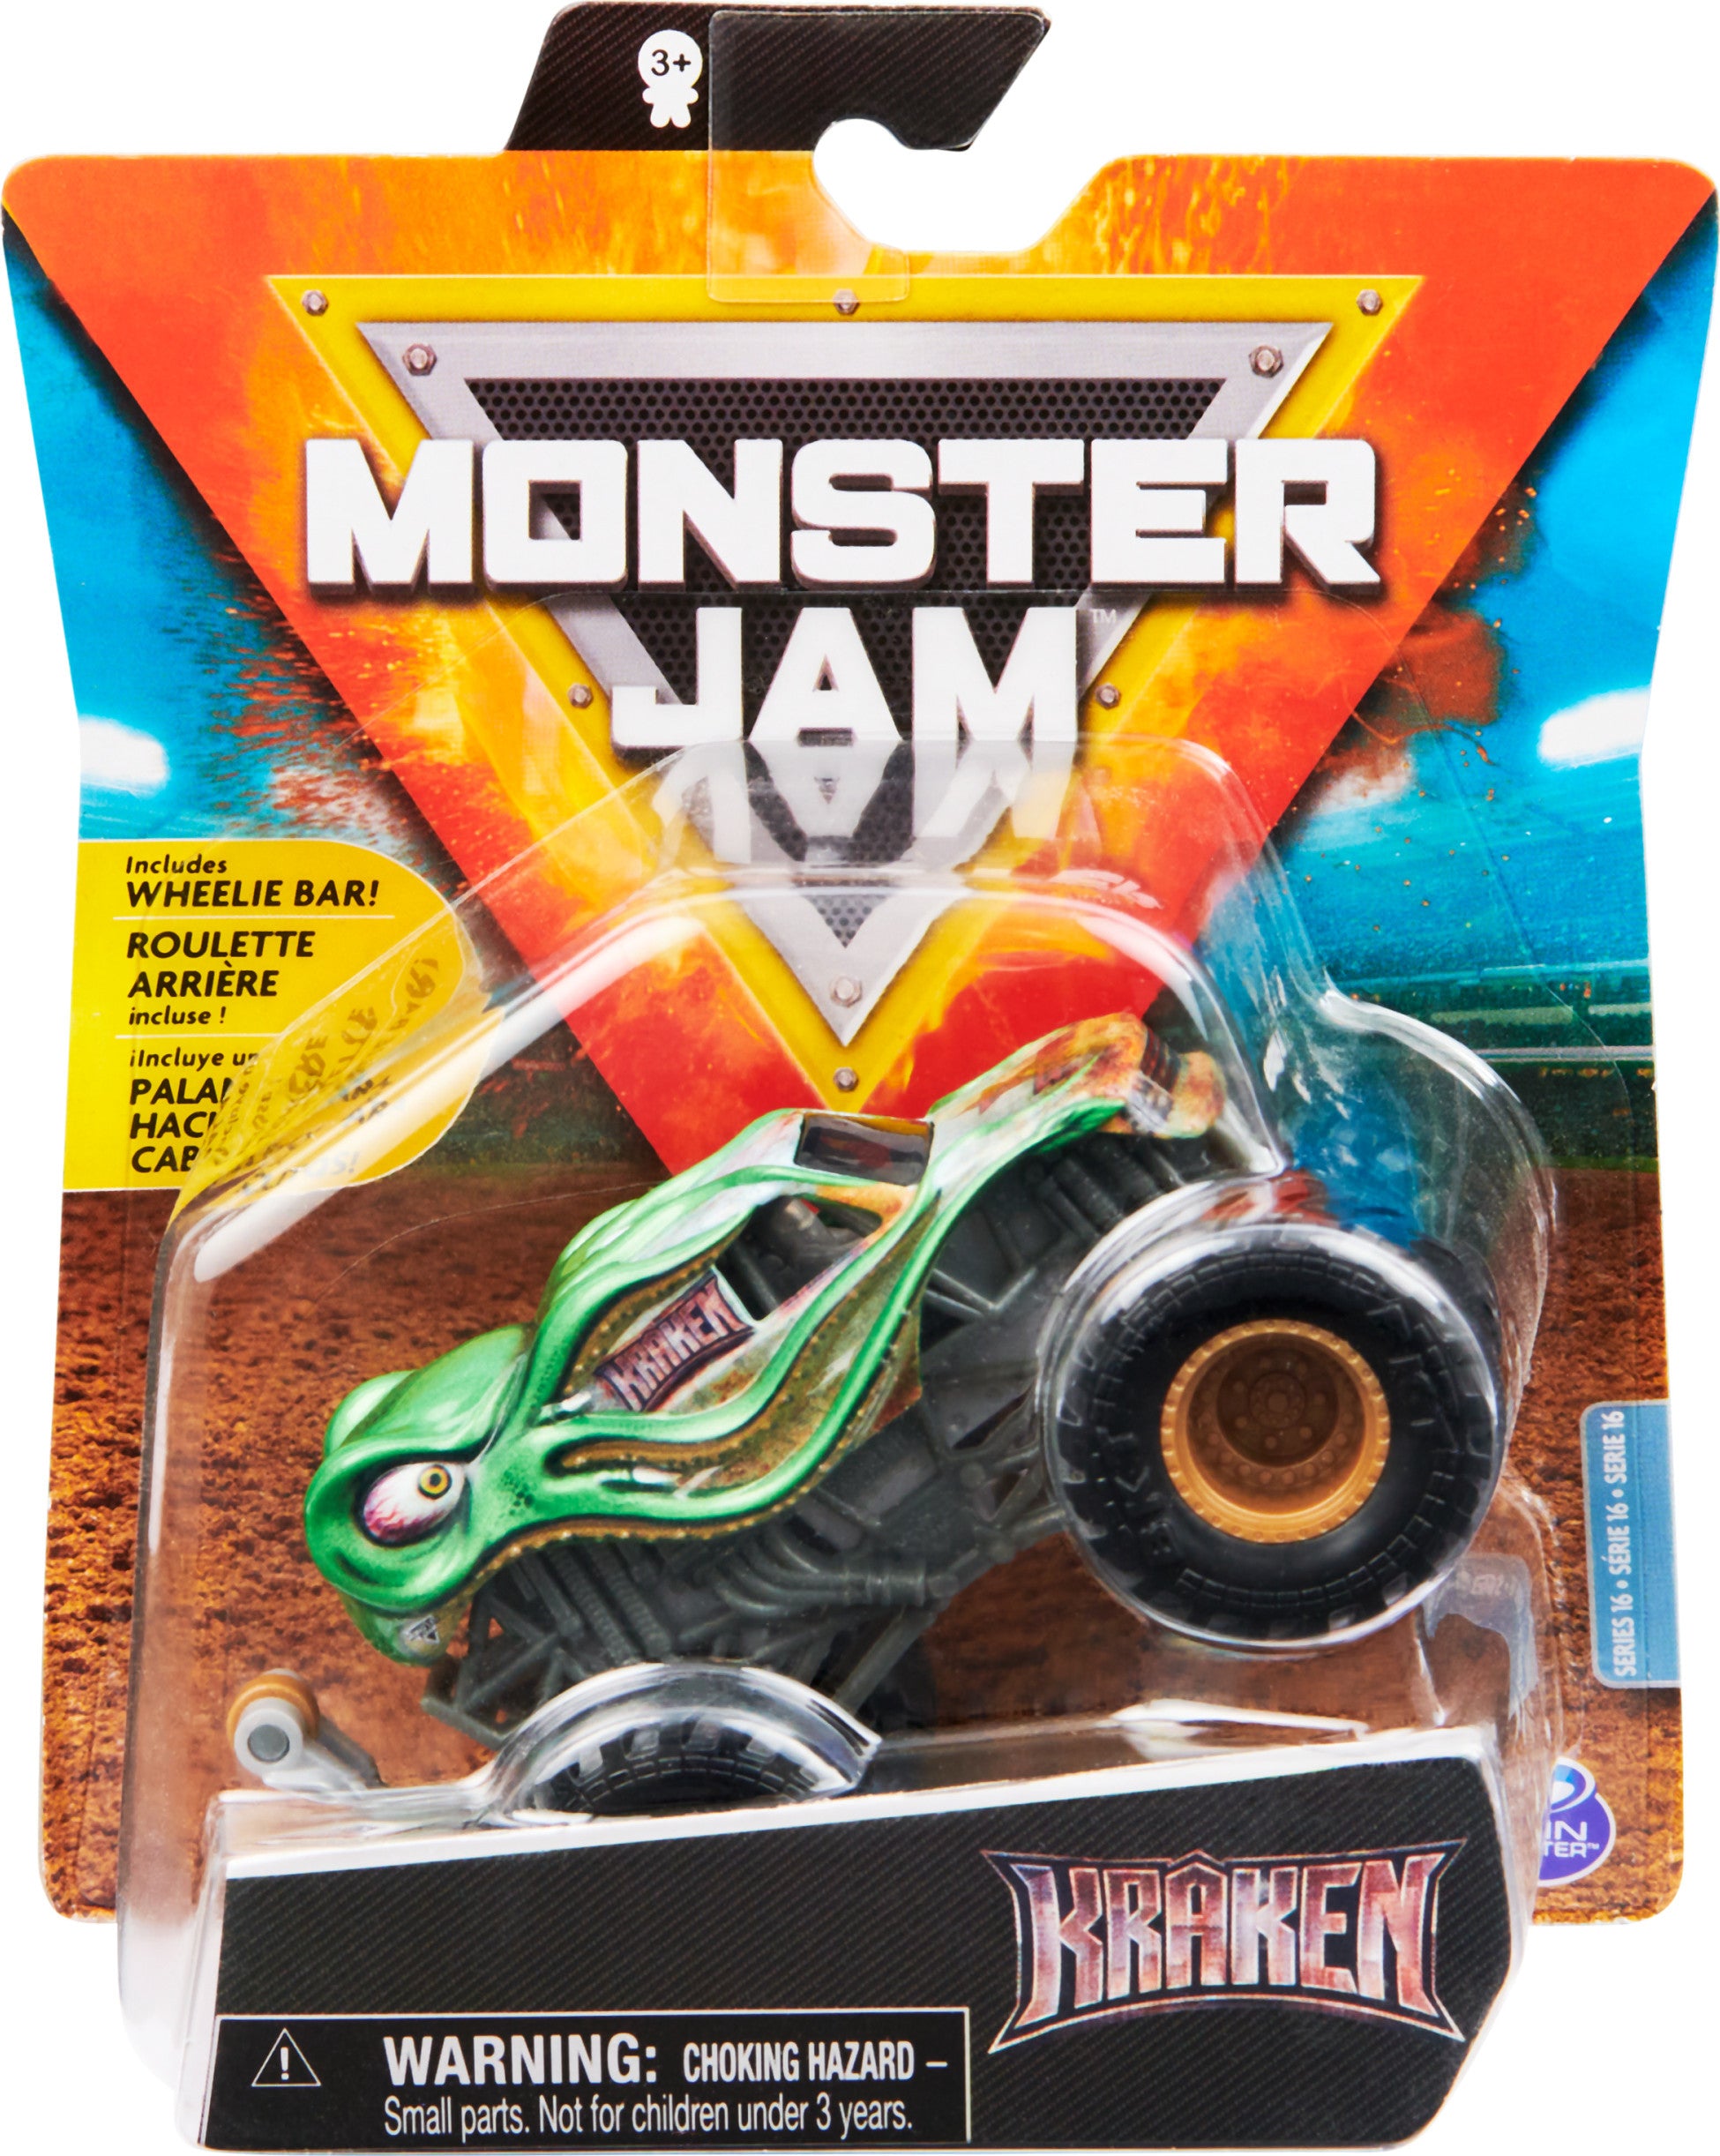 Hot Wheels Monster Trucks 1:24 Scale Vehicles, Collectible Die-Cast Metal  Toy Trucks with Giant Wheels & Stylized Chassis, Gift for Kids Ages 3 Years